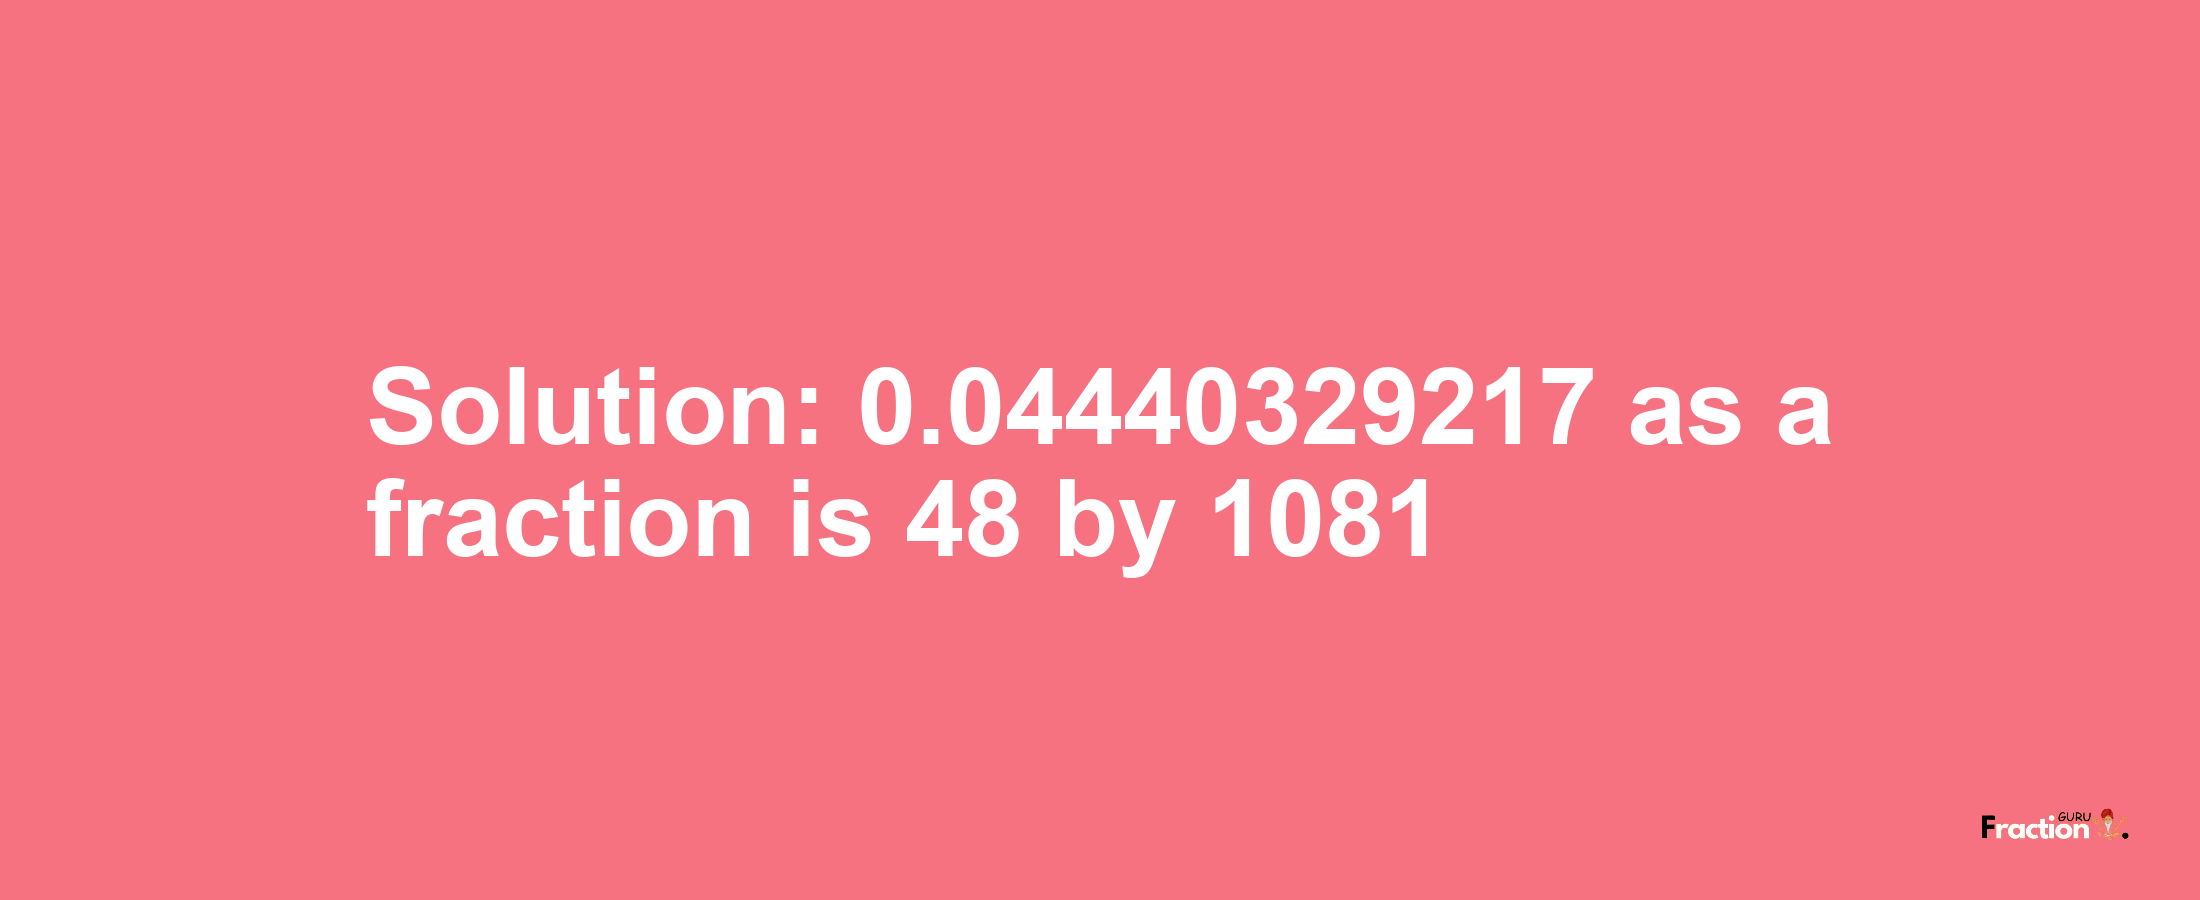 Solution:0.04440329217 as a fraction is 48/1081